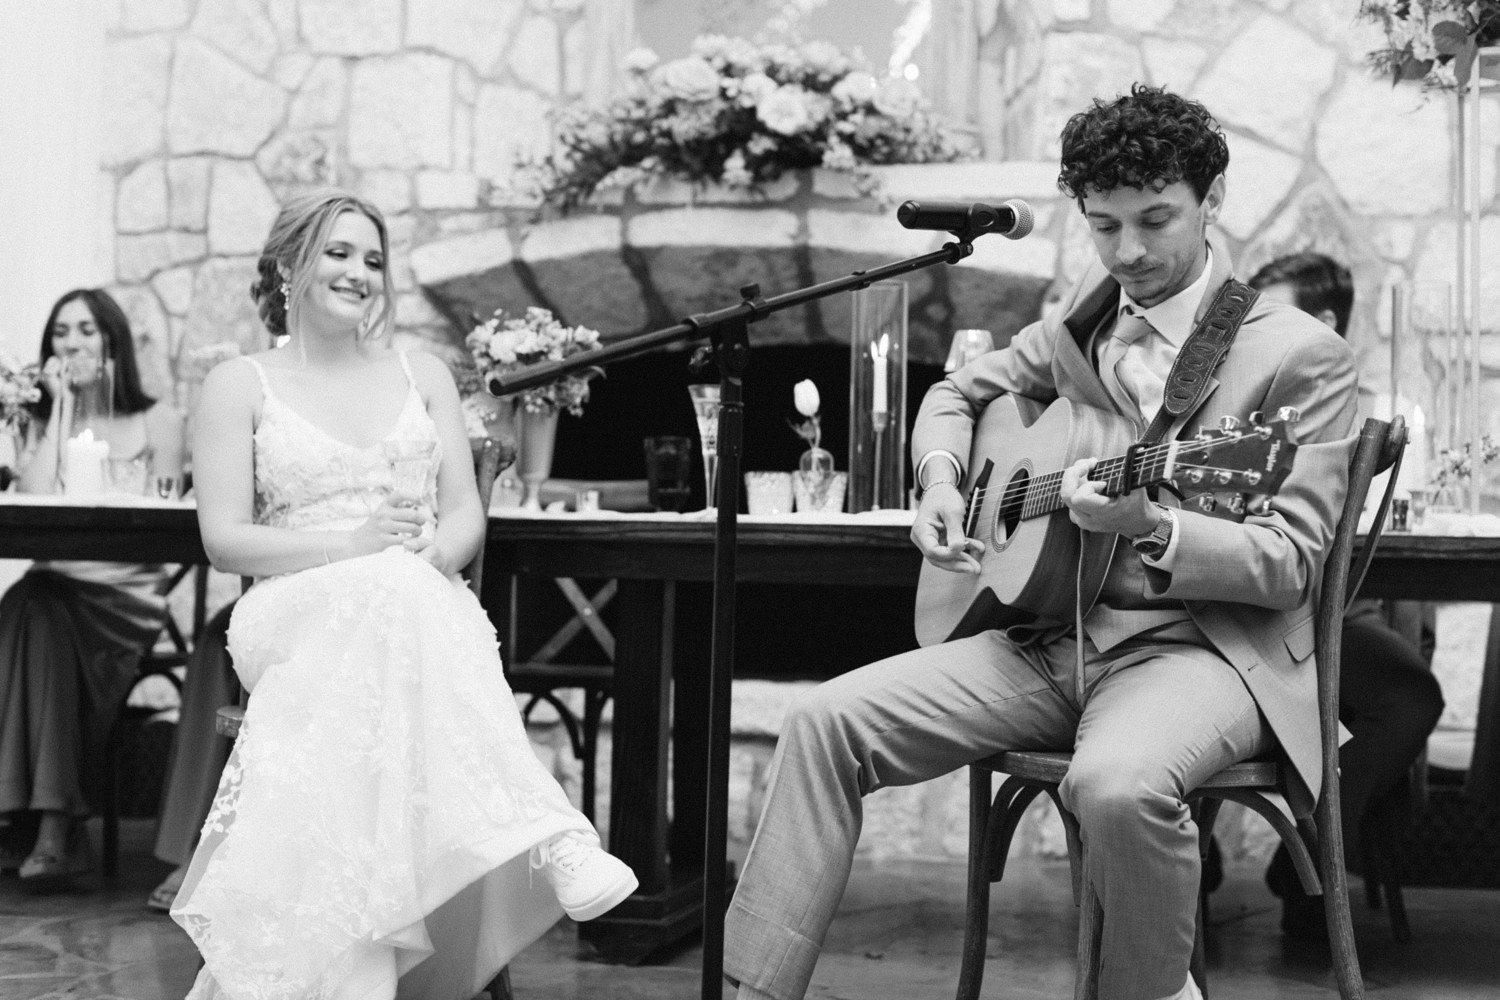 Groom playing song on guitar for bride during wedding reception.